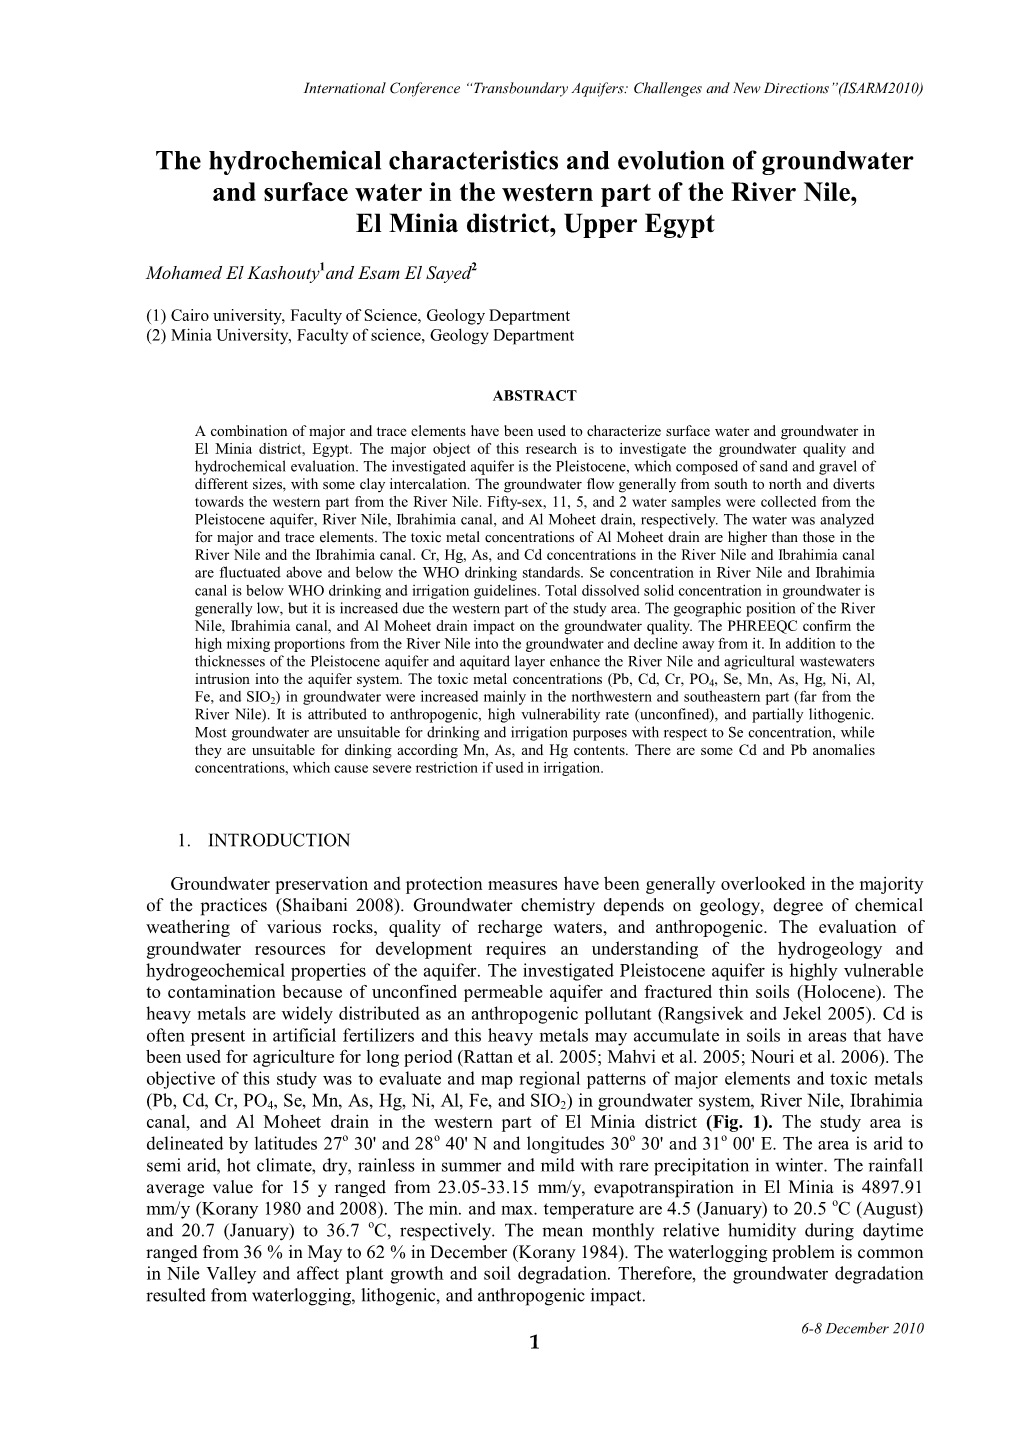 The Hydrochemical Characteristics and Evolution of Groundwater and Surface Water in the Western Part of the River Nile, El Minia District, Upper Egypt